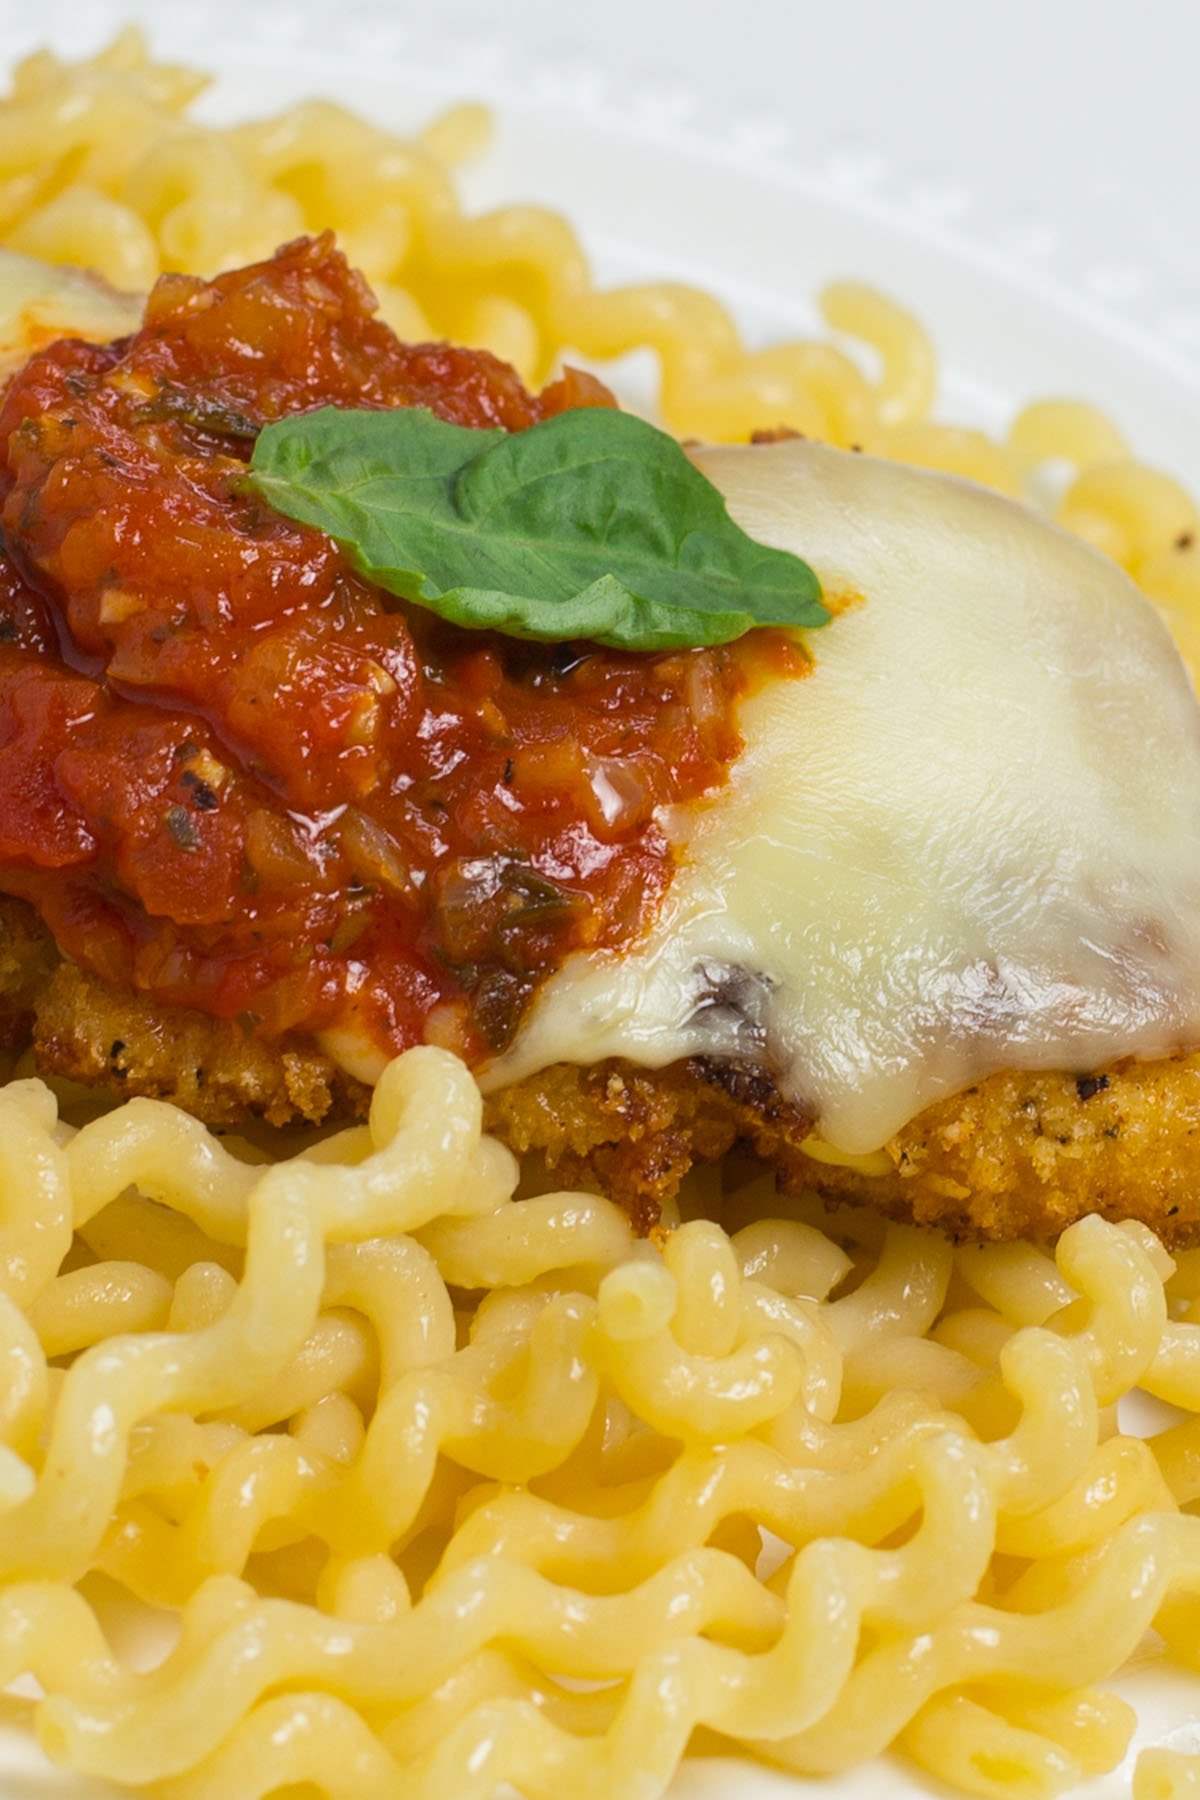 Chicken cutlet topped with melted cheese and marinara sauce on bed of pasta.